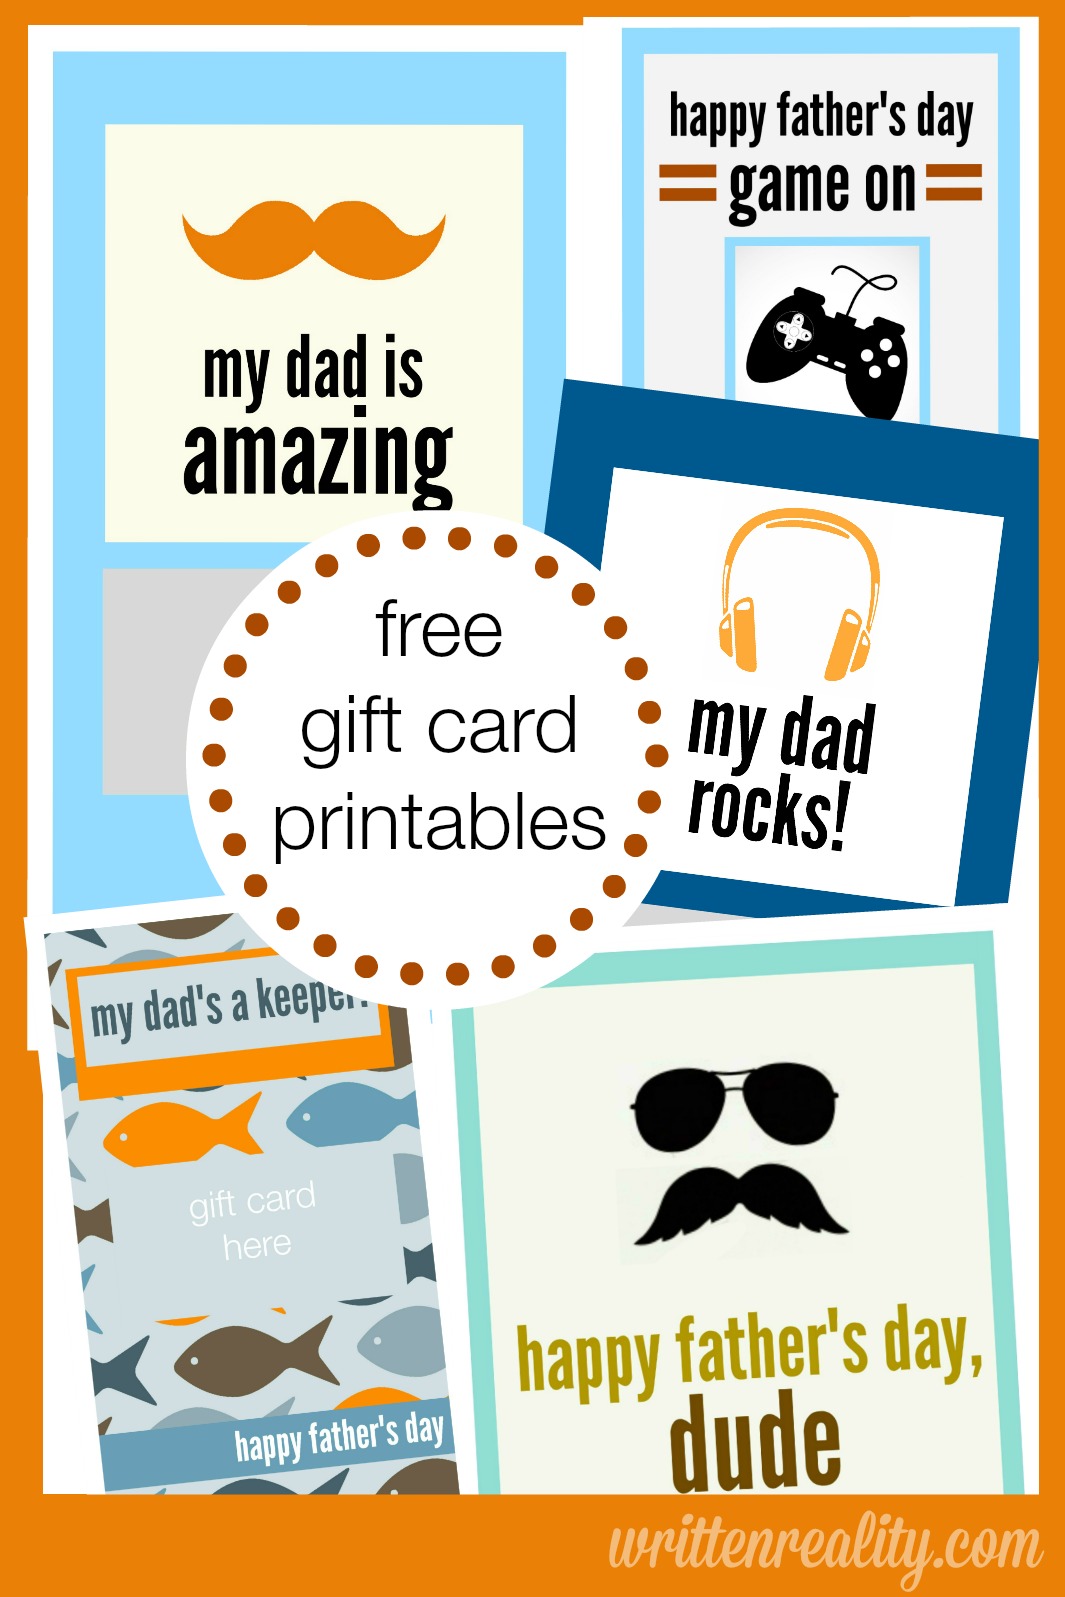 Free Father's Day Cards Written Reality